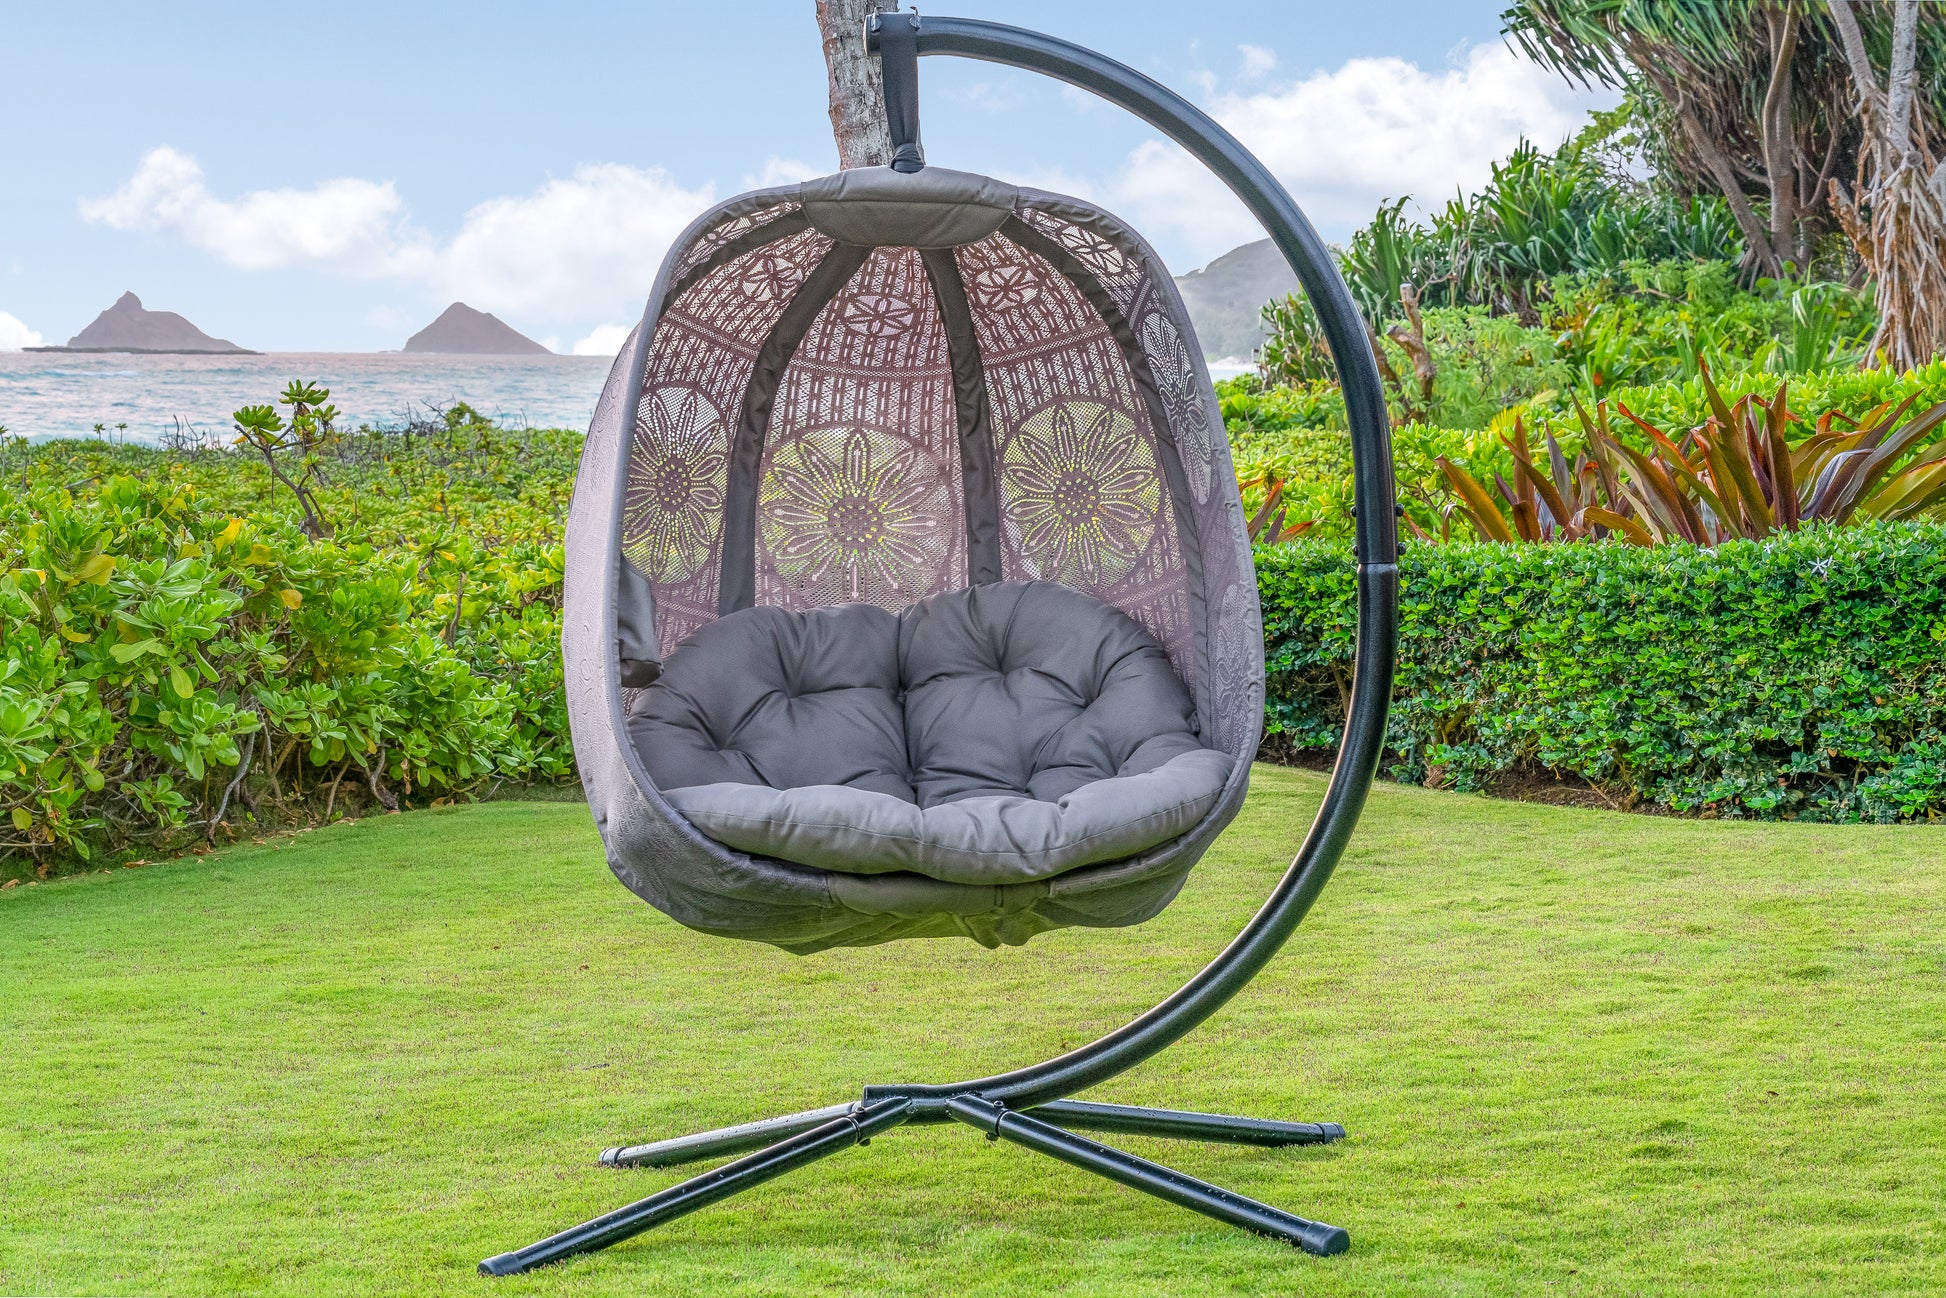 FlowerHouse Hanging Egg Chair - Dreamcatcher with stand